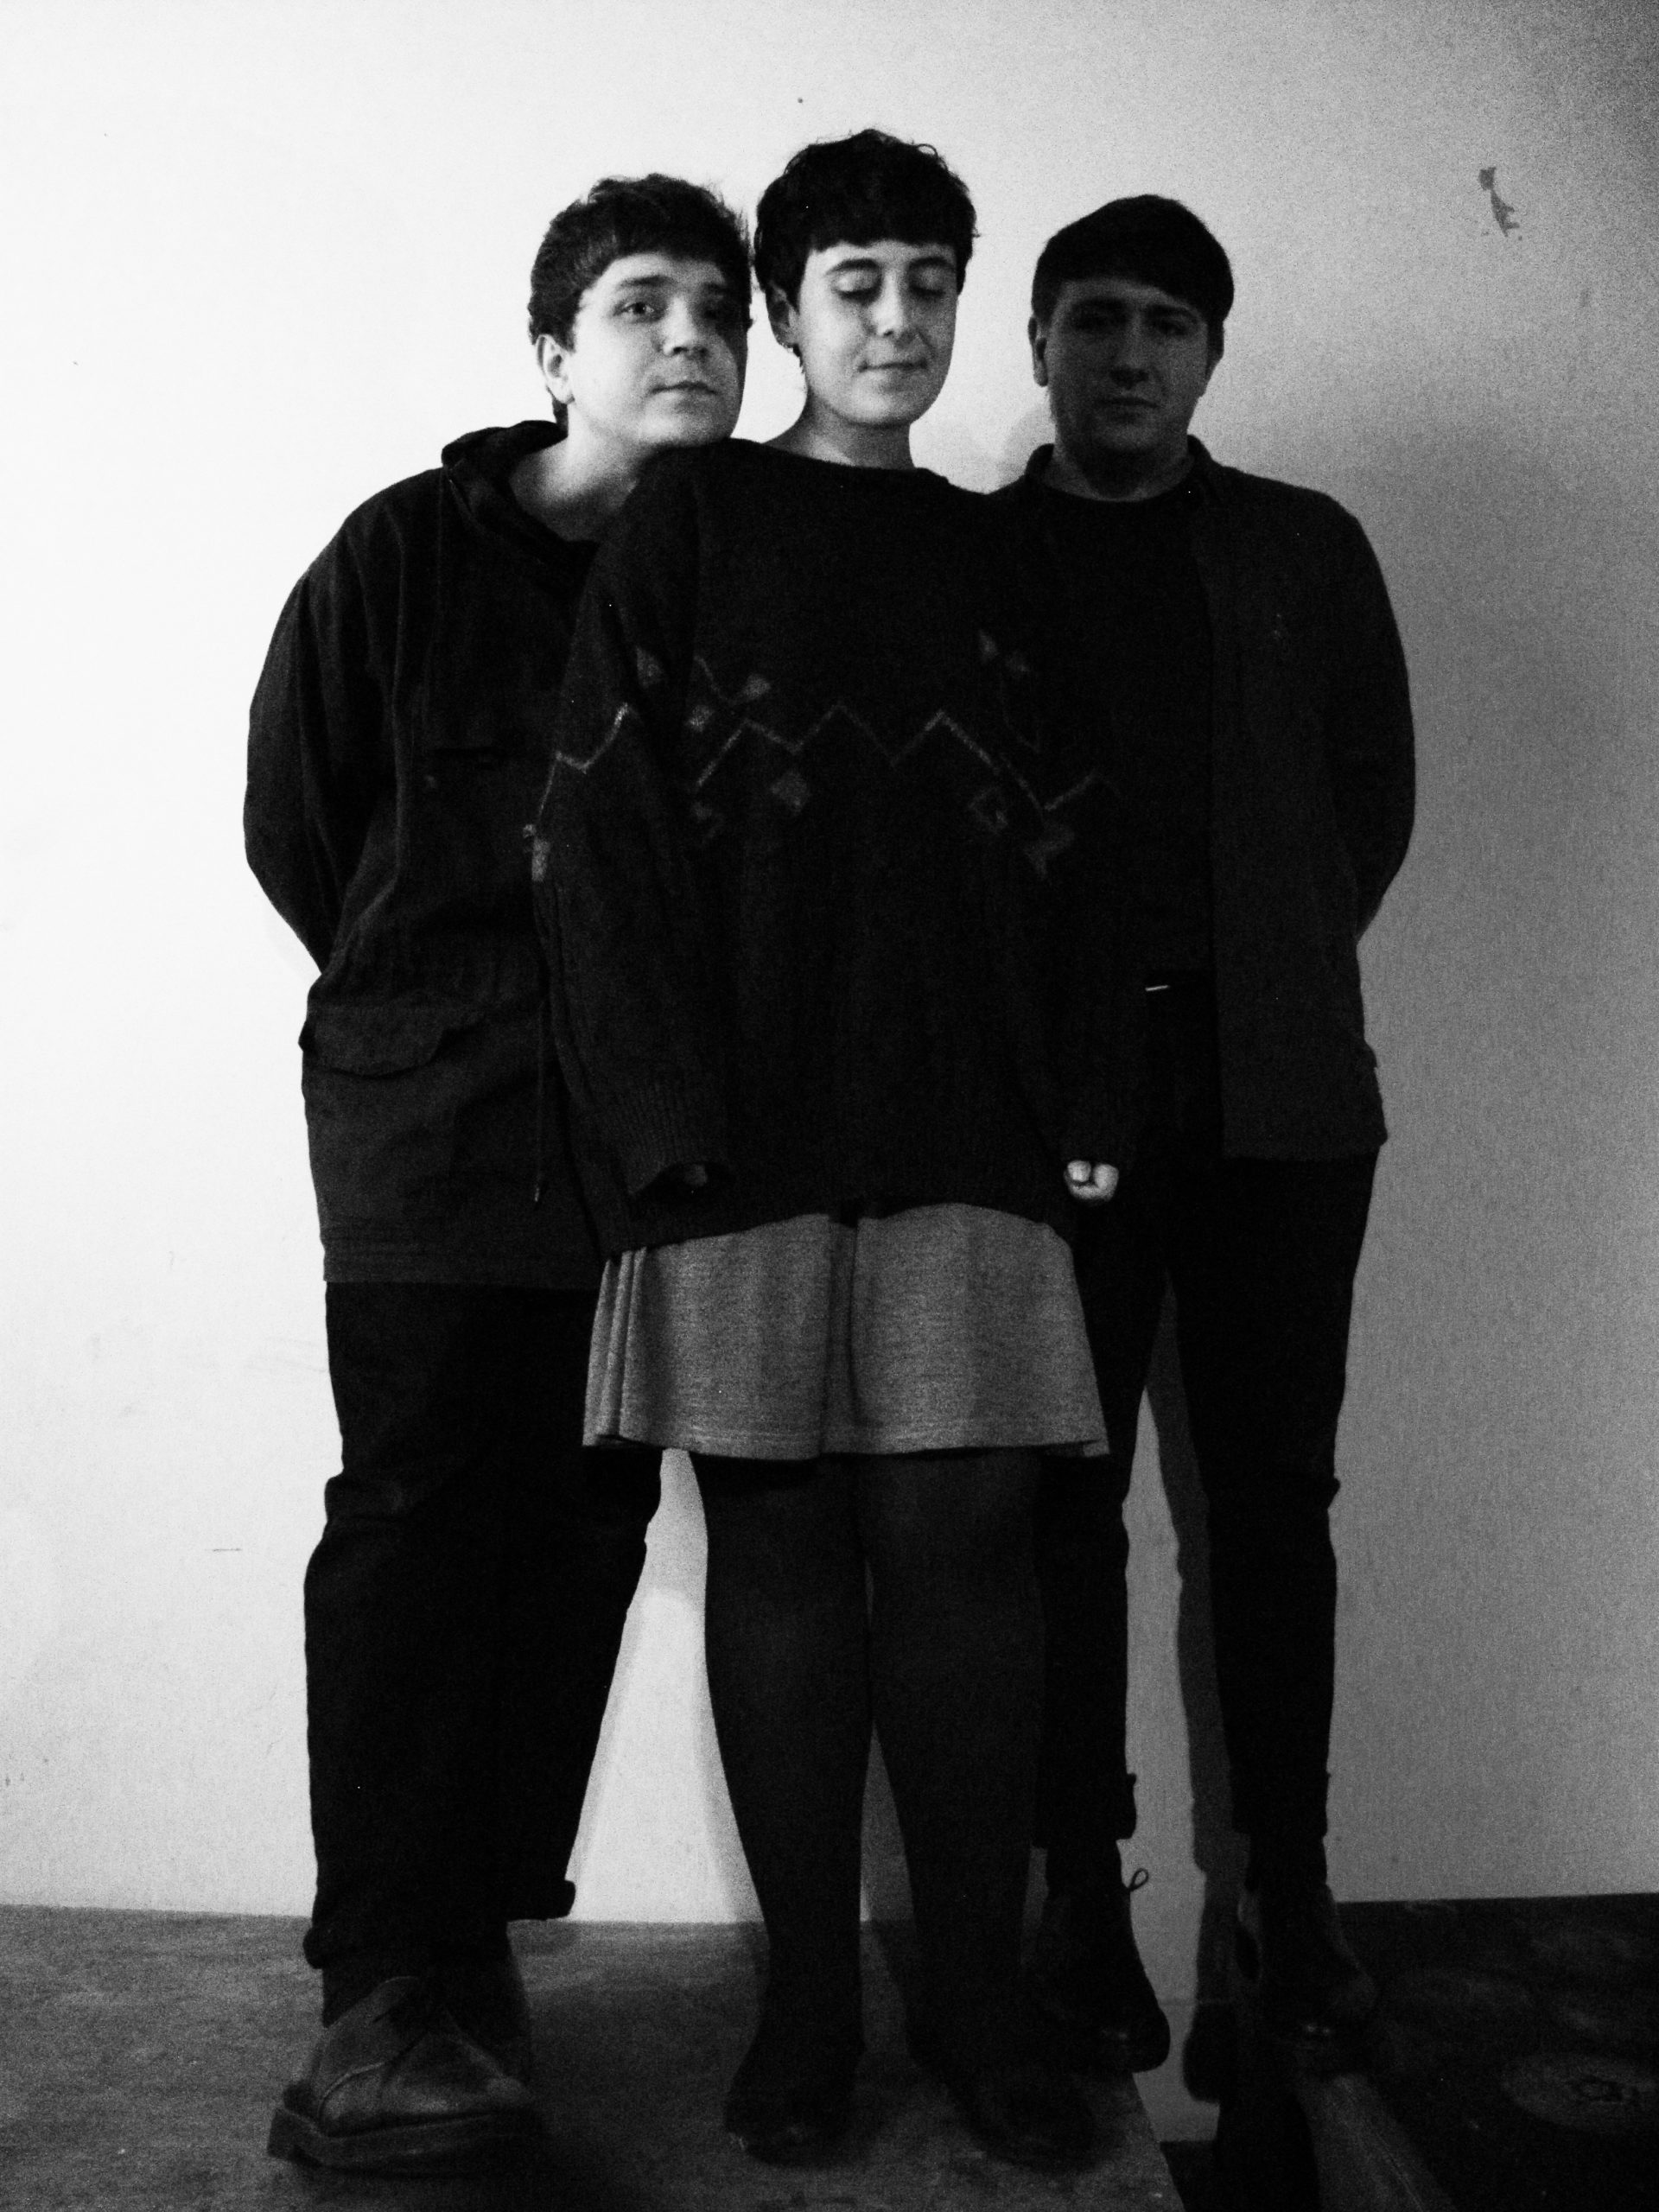 Listen to the B-side from Flowers’ upcoming Slumberland 7″ via Post-Trash